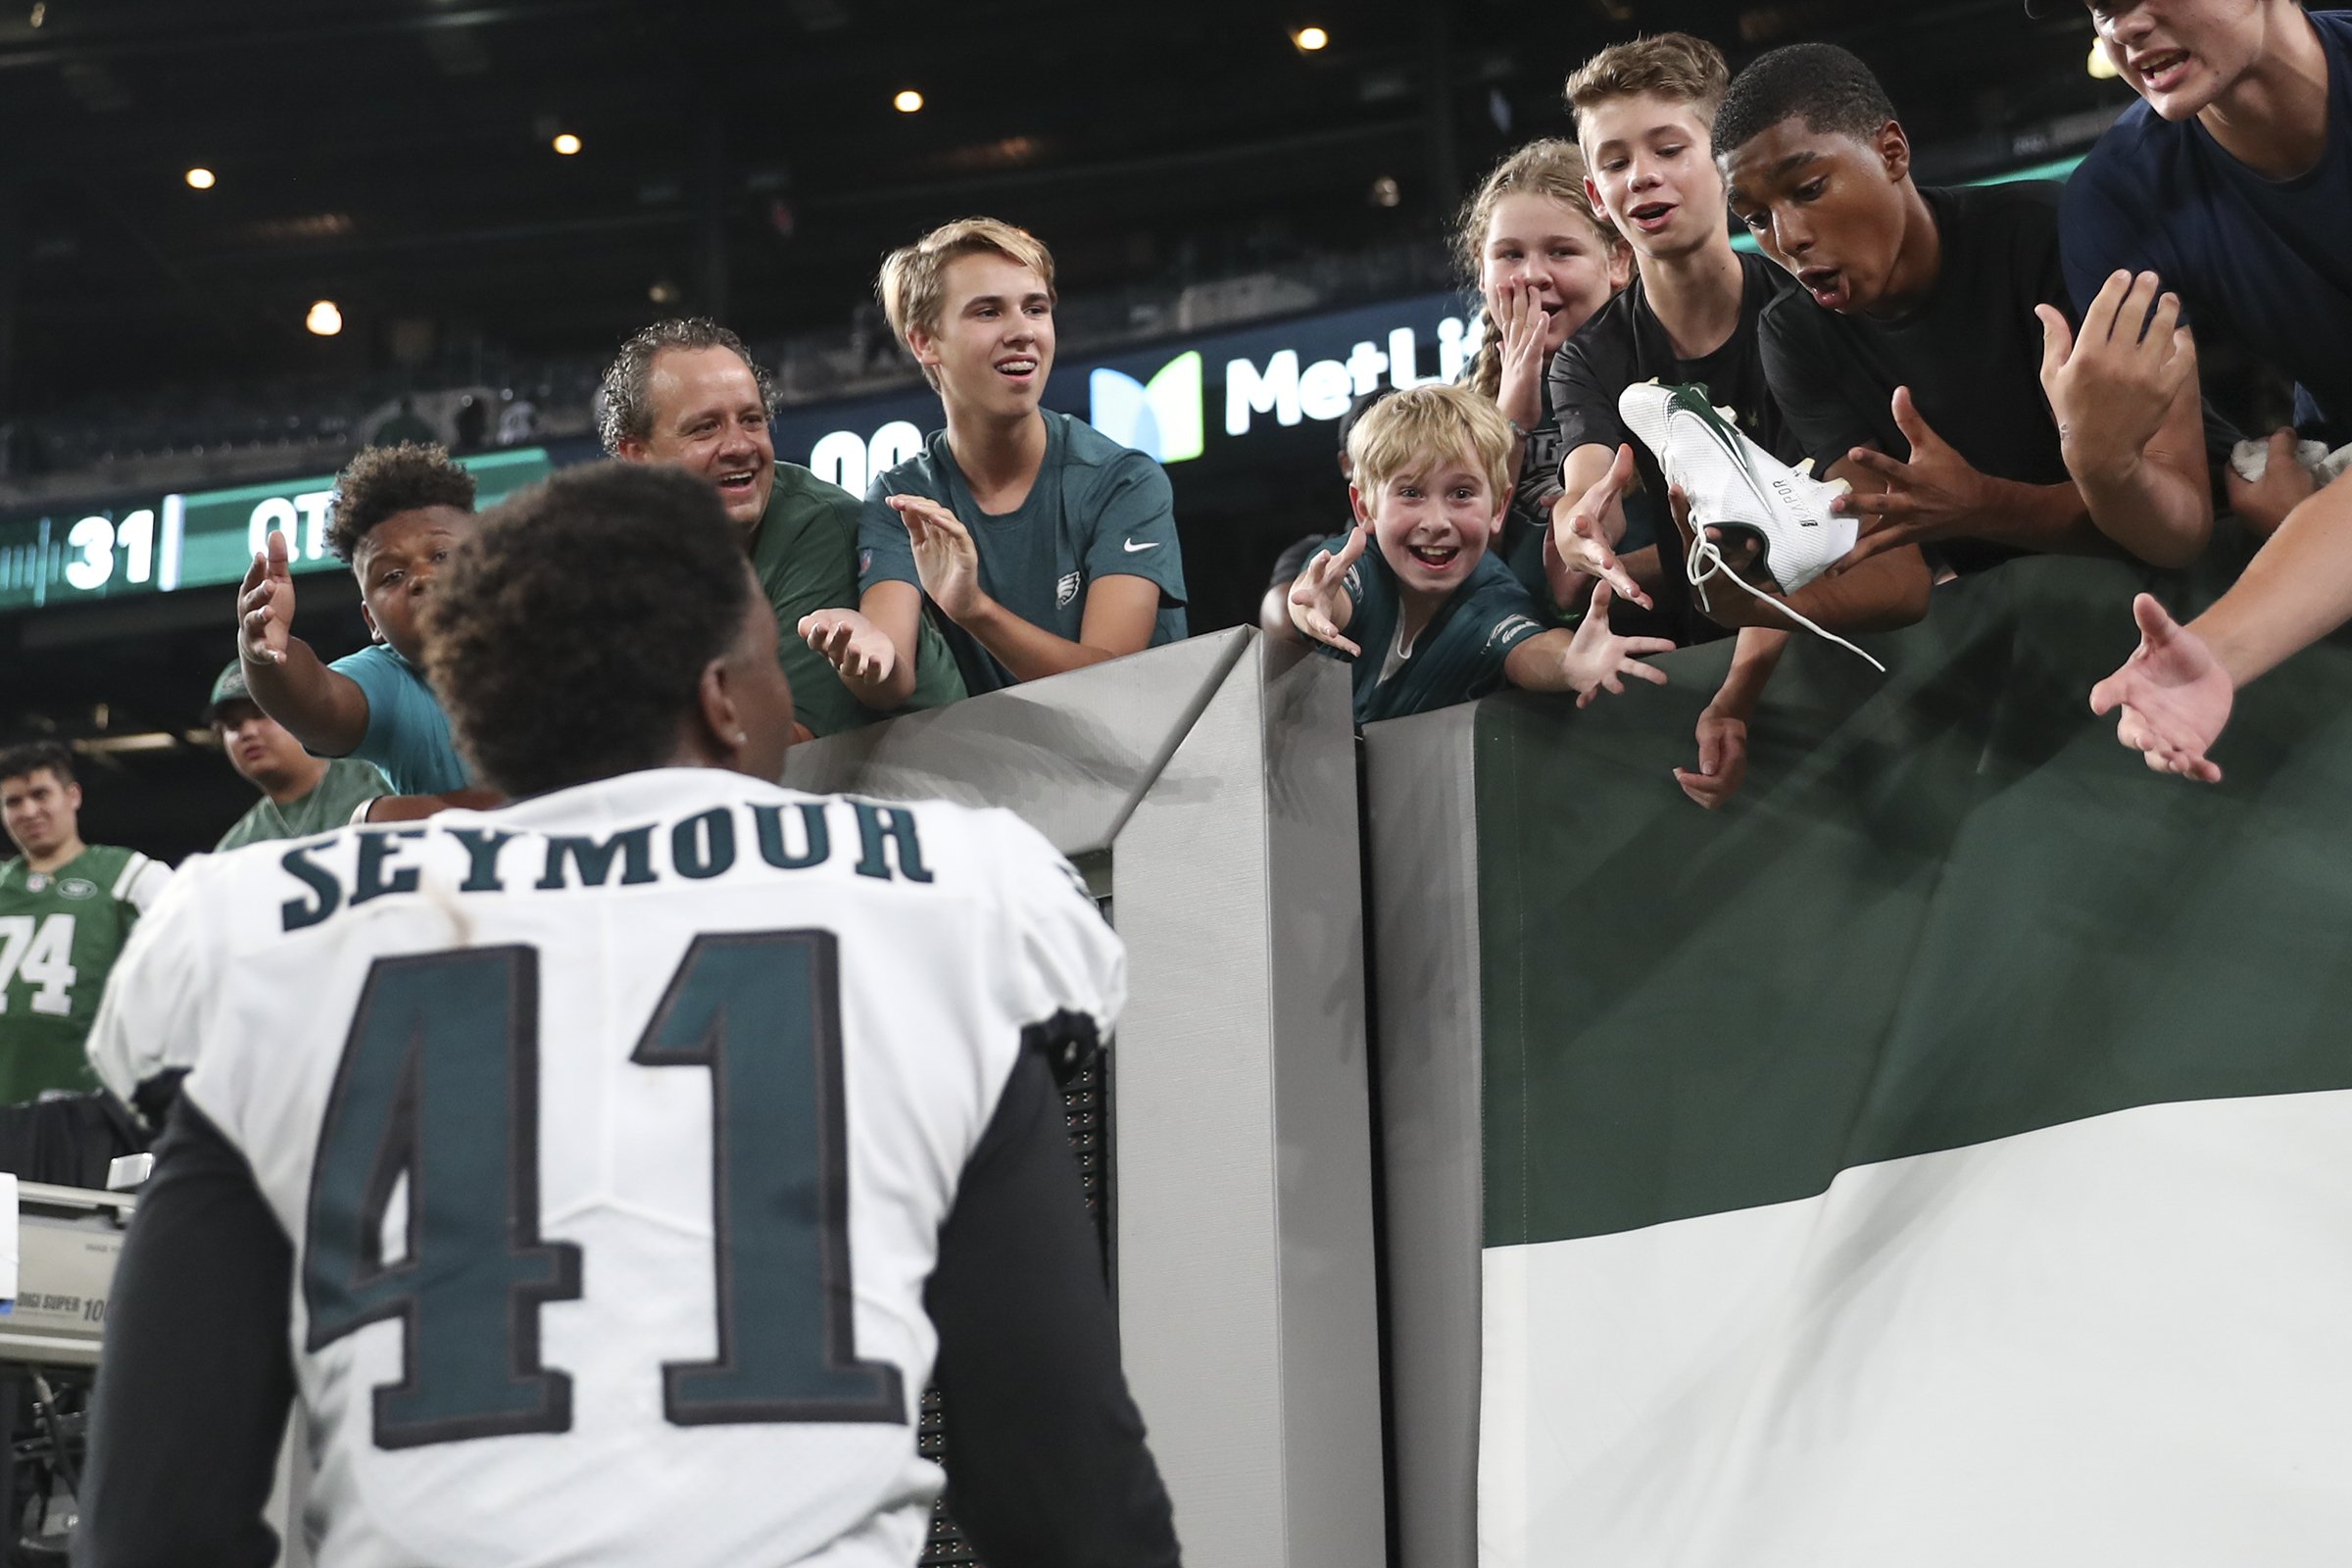  Philadelphia Eagles cornerback Kevon Seymour (41) throws his cleats to fans at the end of a preseason game against the New York Jets at MetLife Stadium in East Rutherford, NJ on Aug. 27, 2021. 